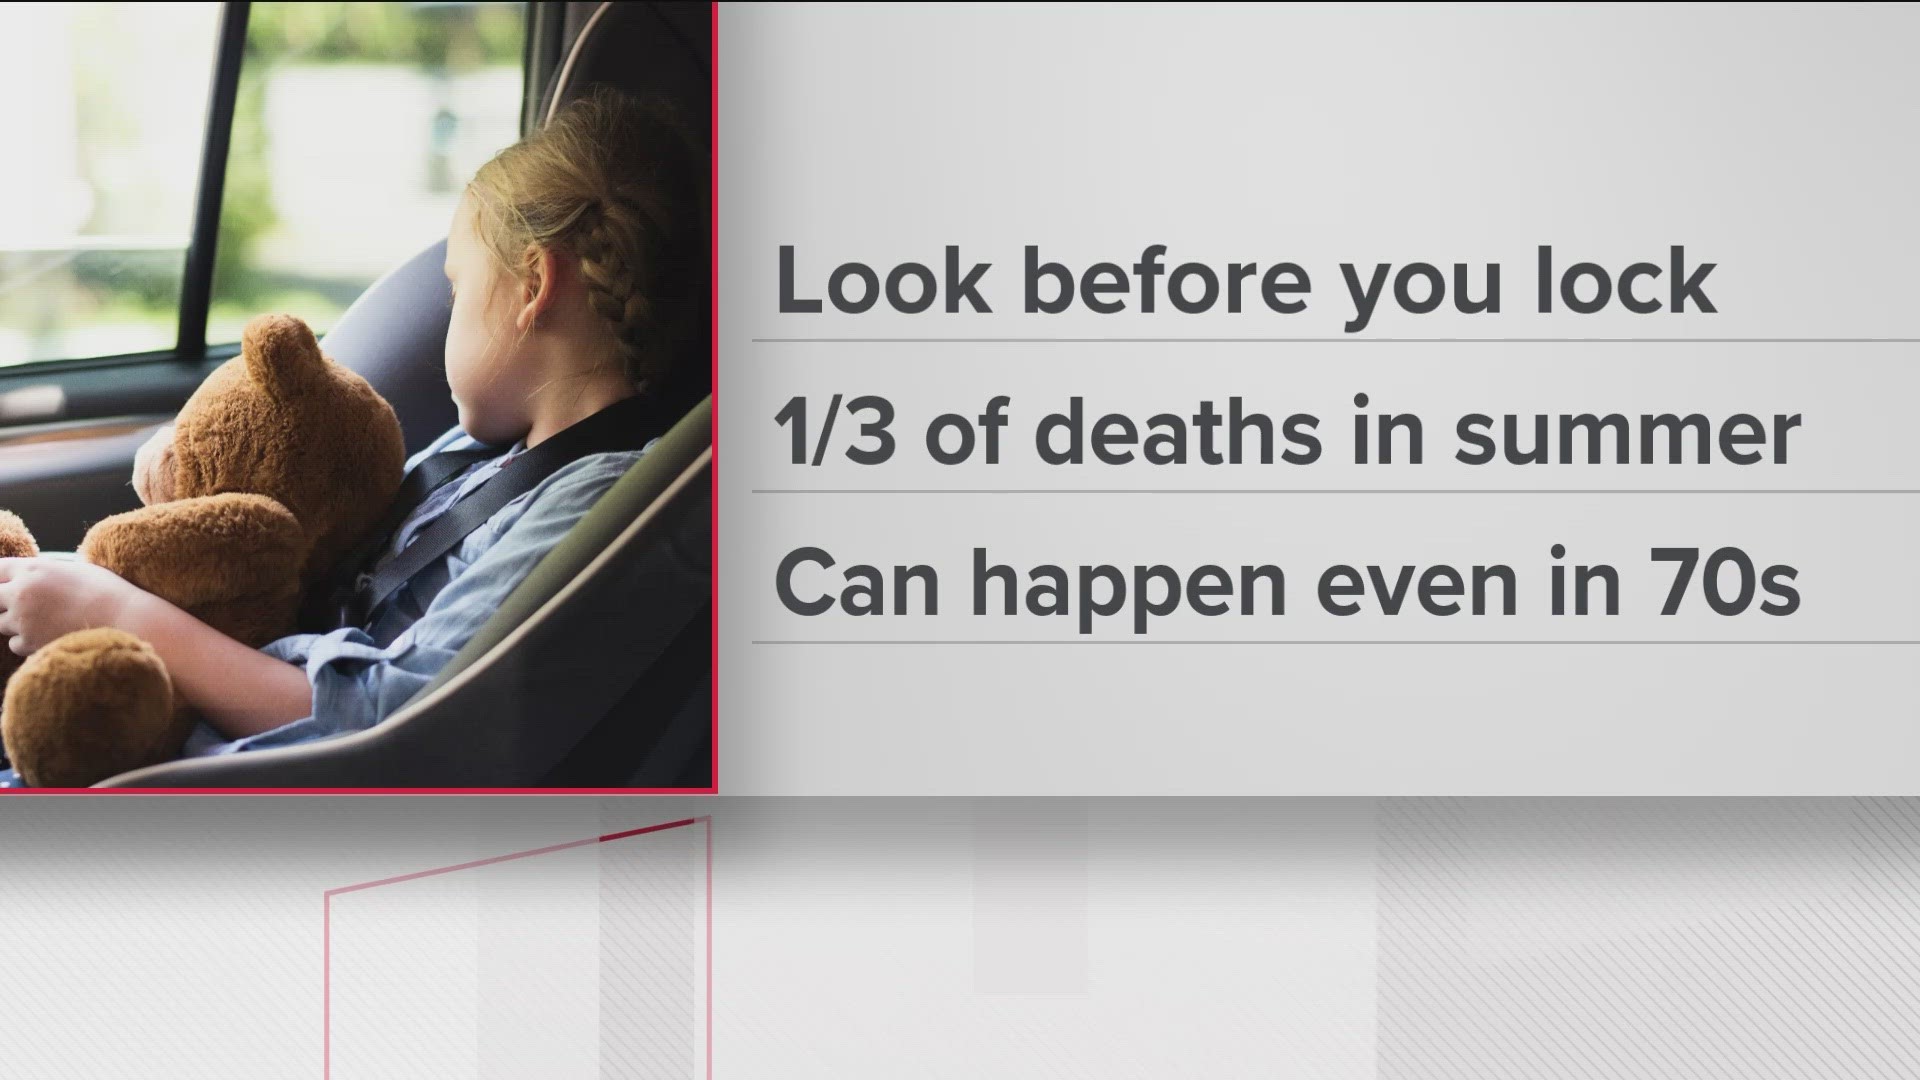 The National Weather Service is reminding parents and caregivers to remember to check their backseat for their kids as the weather gets hotter.